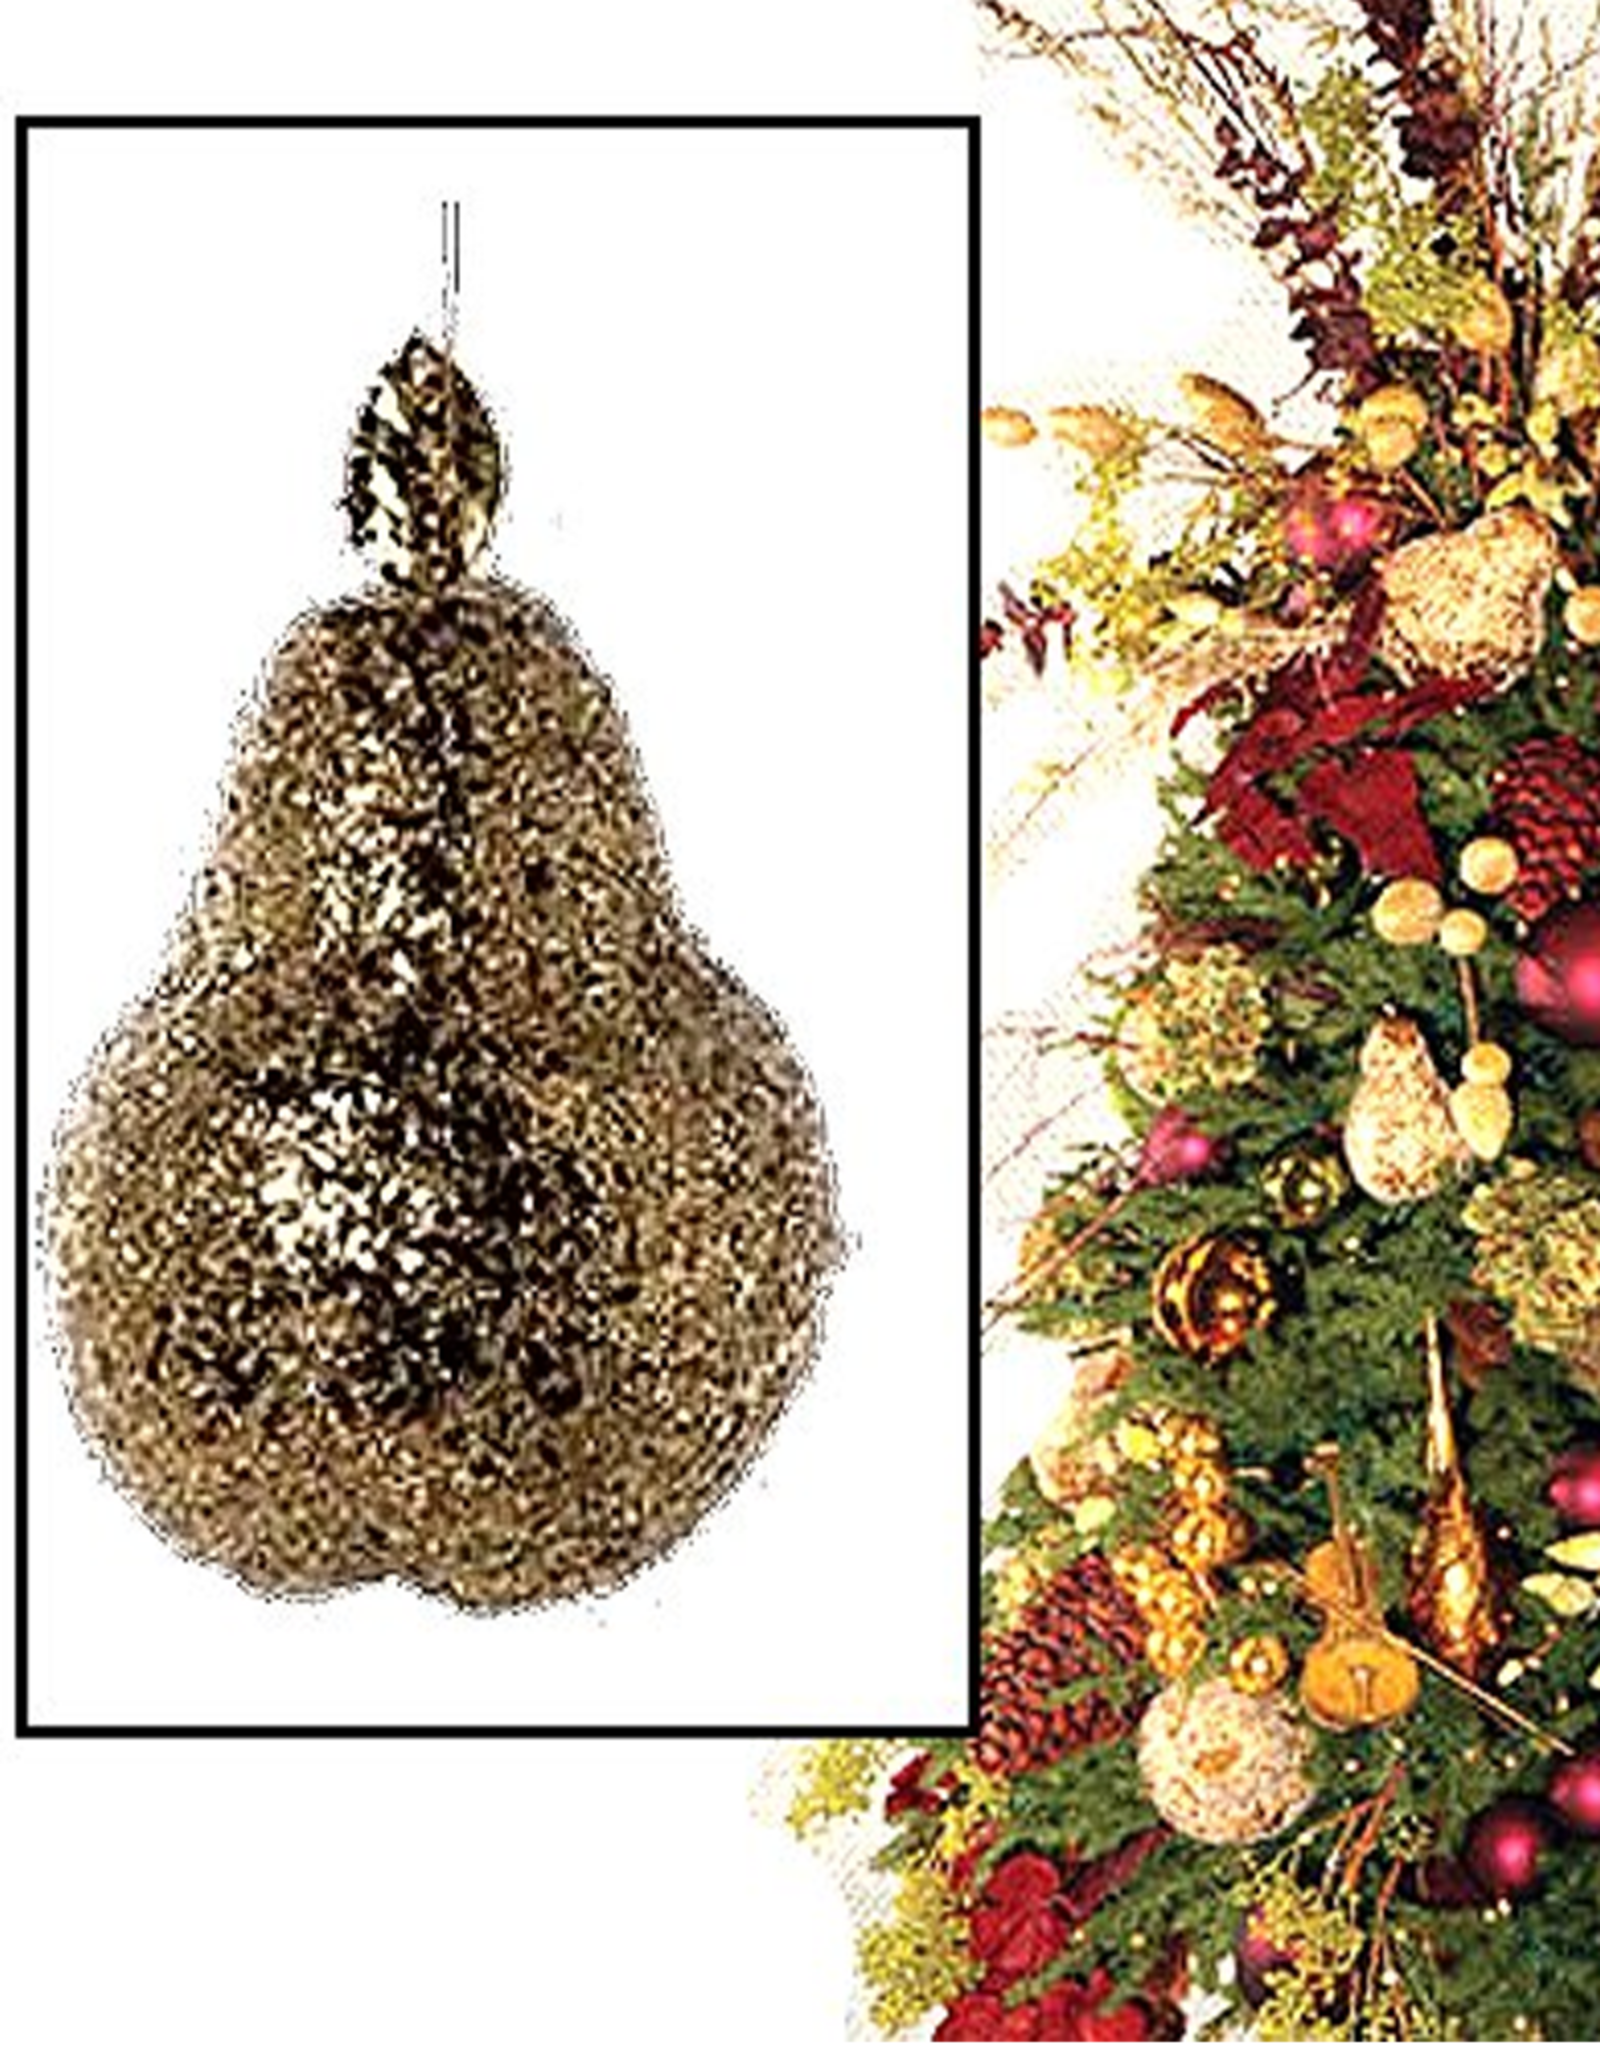 K&K Interiors Fruit Large Crushed Icy Pear Ornament 10 Inch